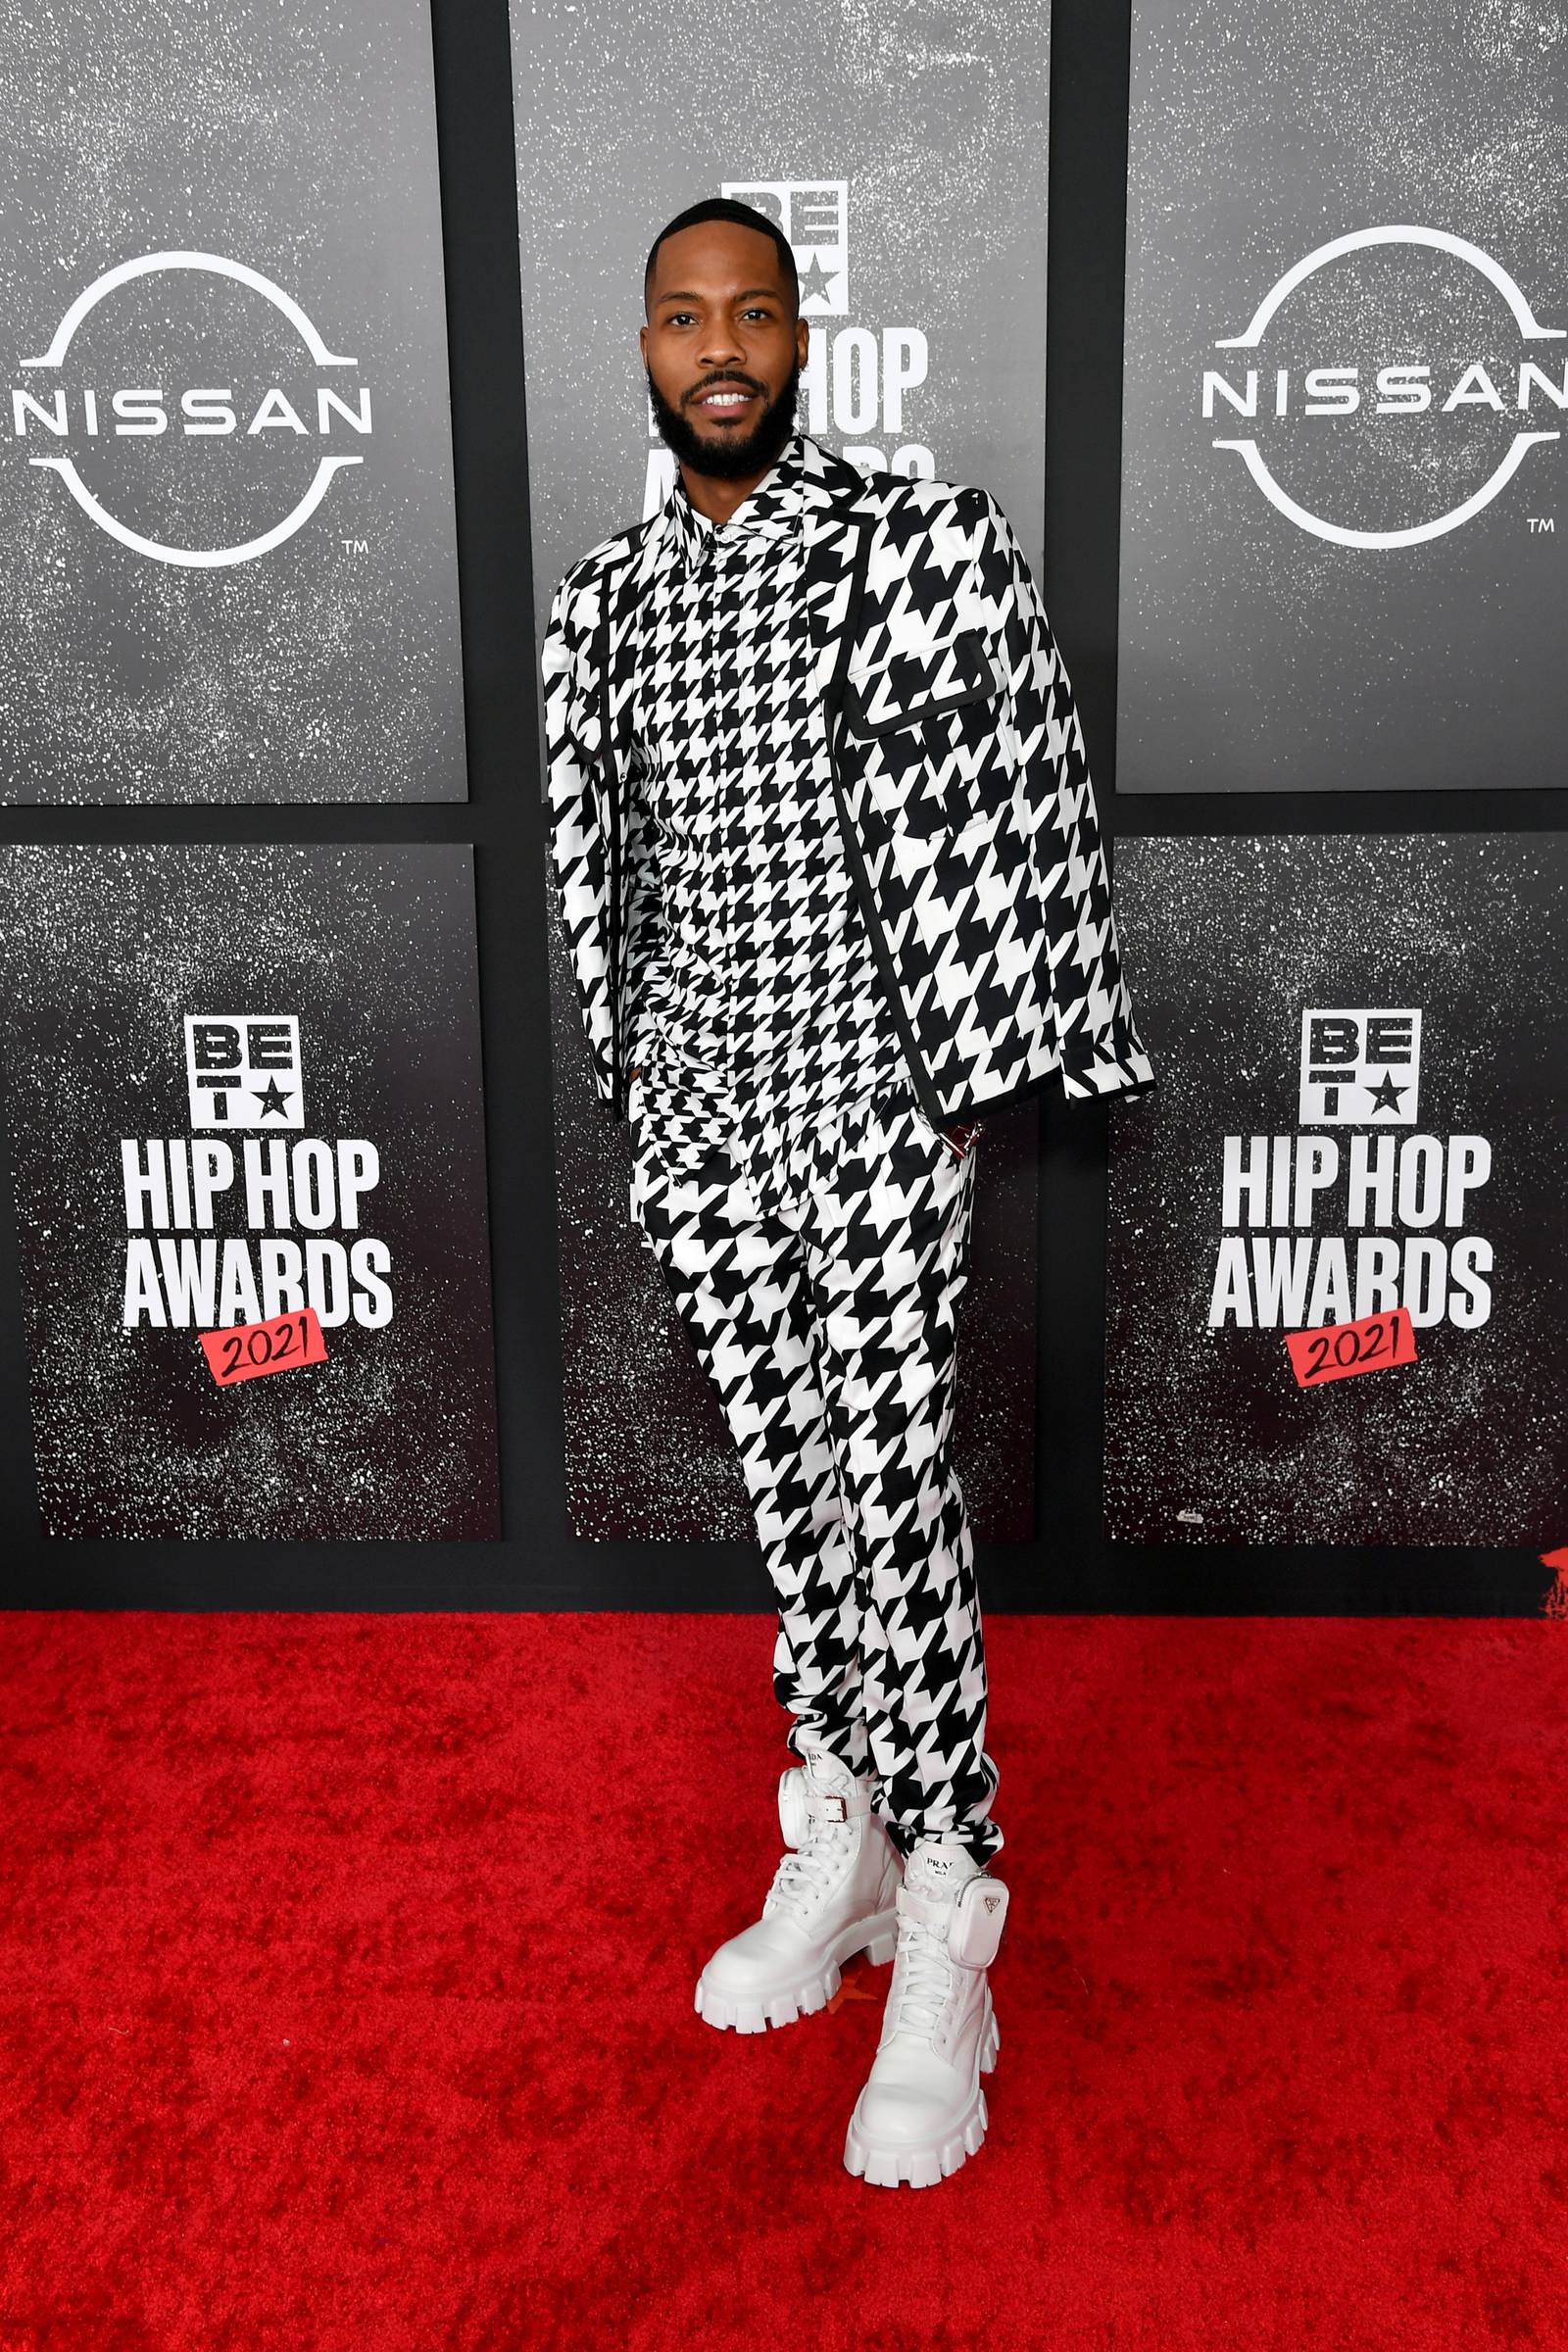 BET Hip Hop Awards 2021 See the complete list of winners 99.5 KISS FM